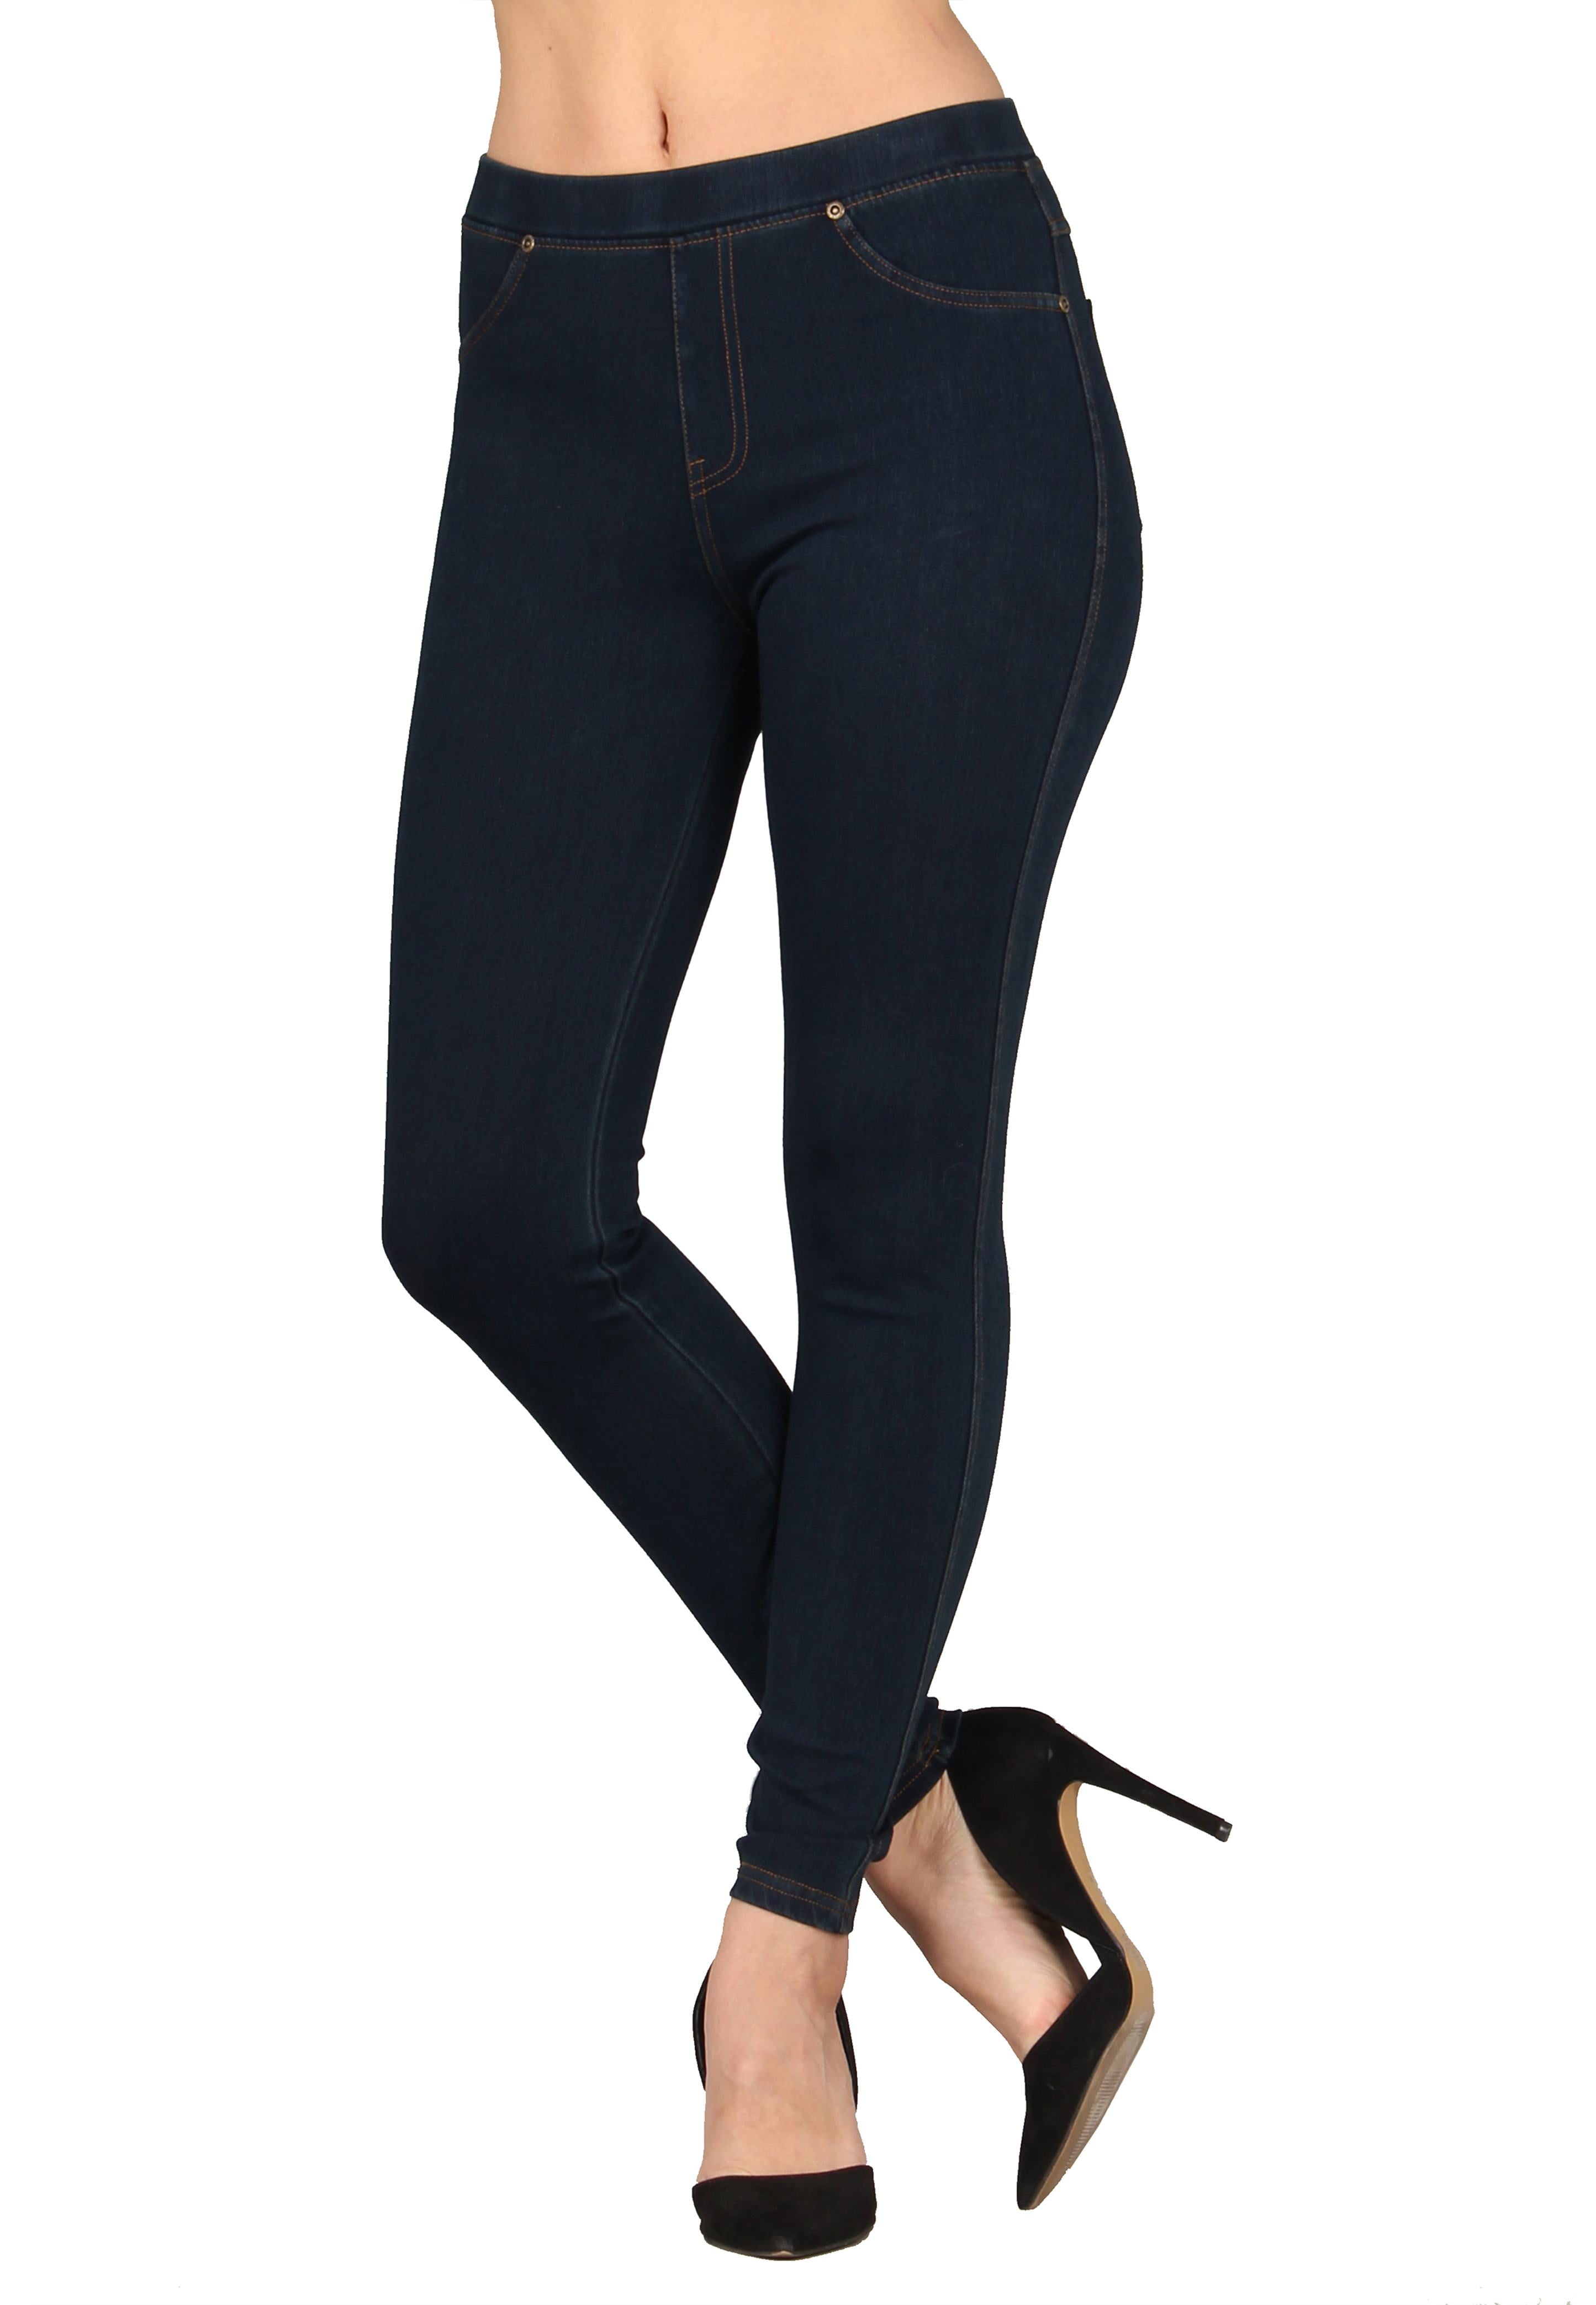 Lildy Women's Jeggings On Sale Up To 90% Off Retail